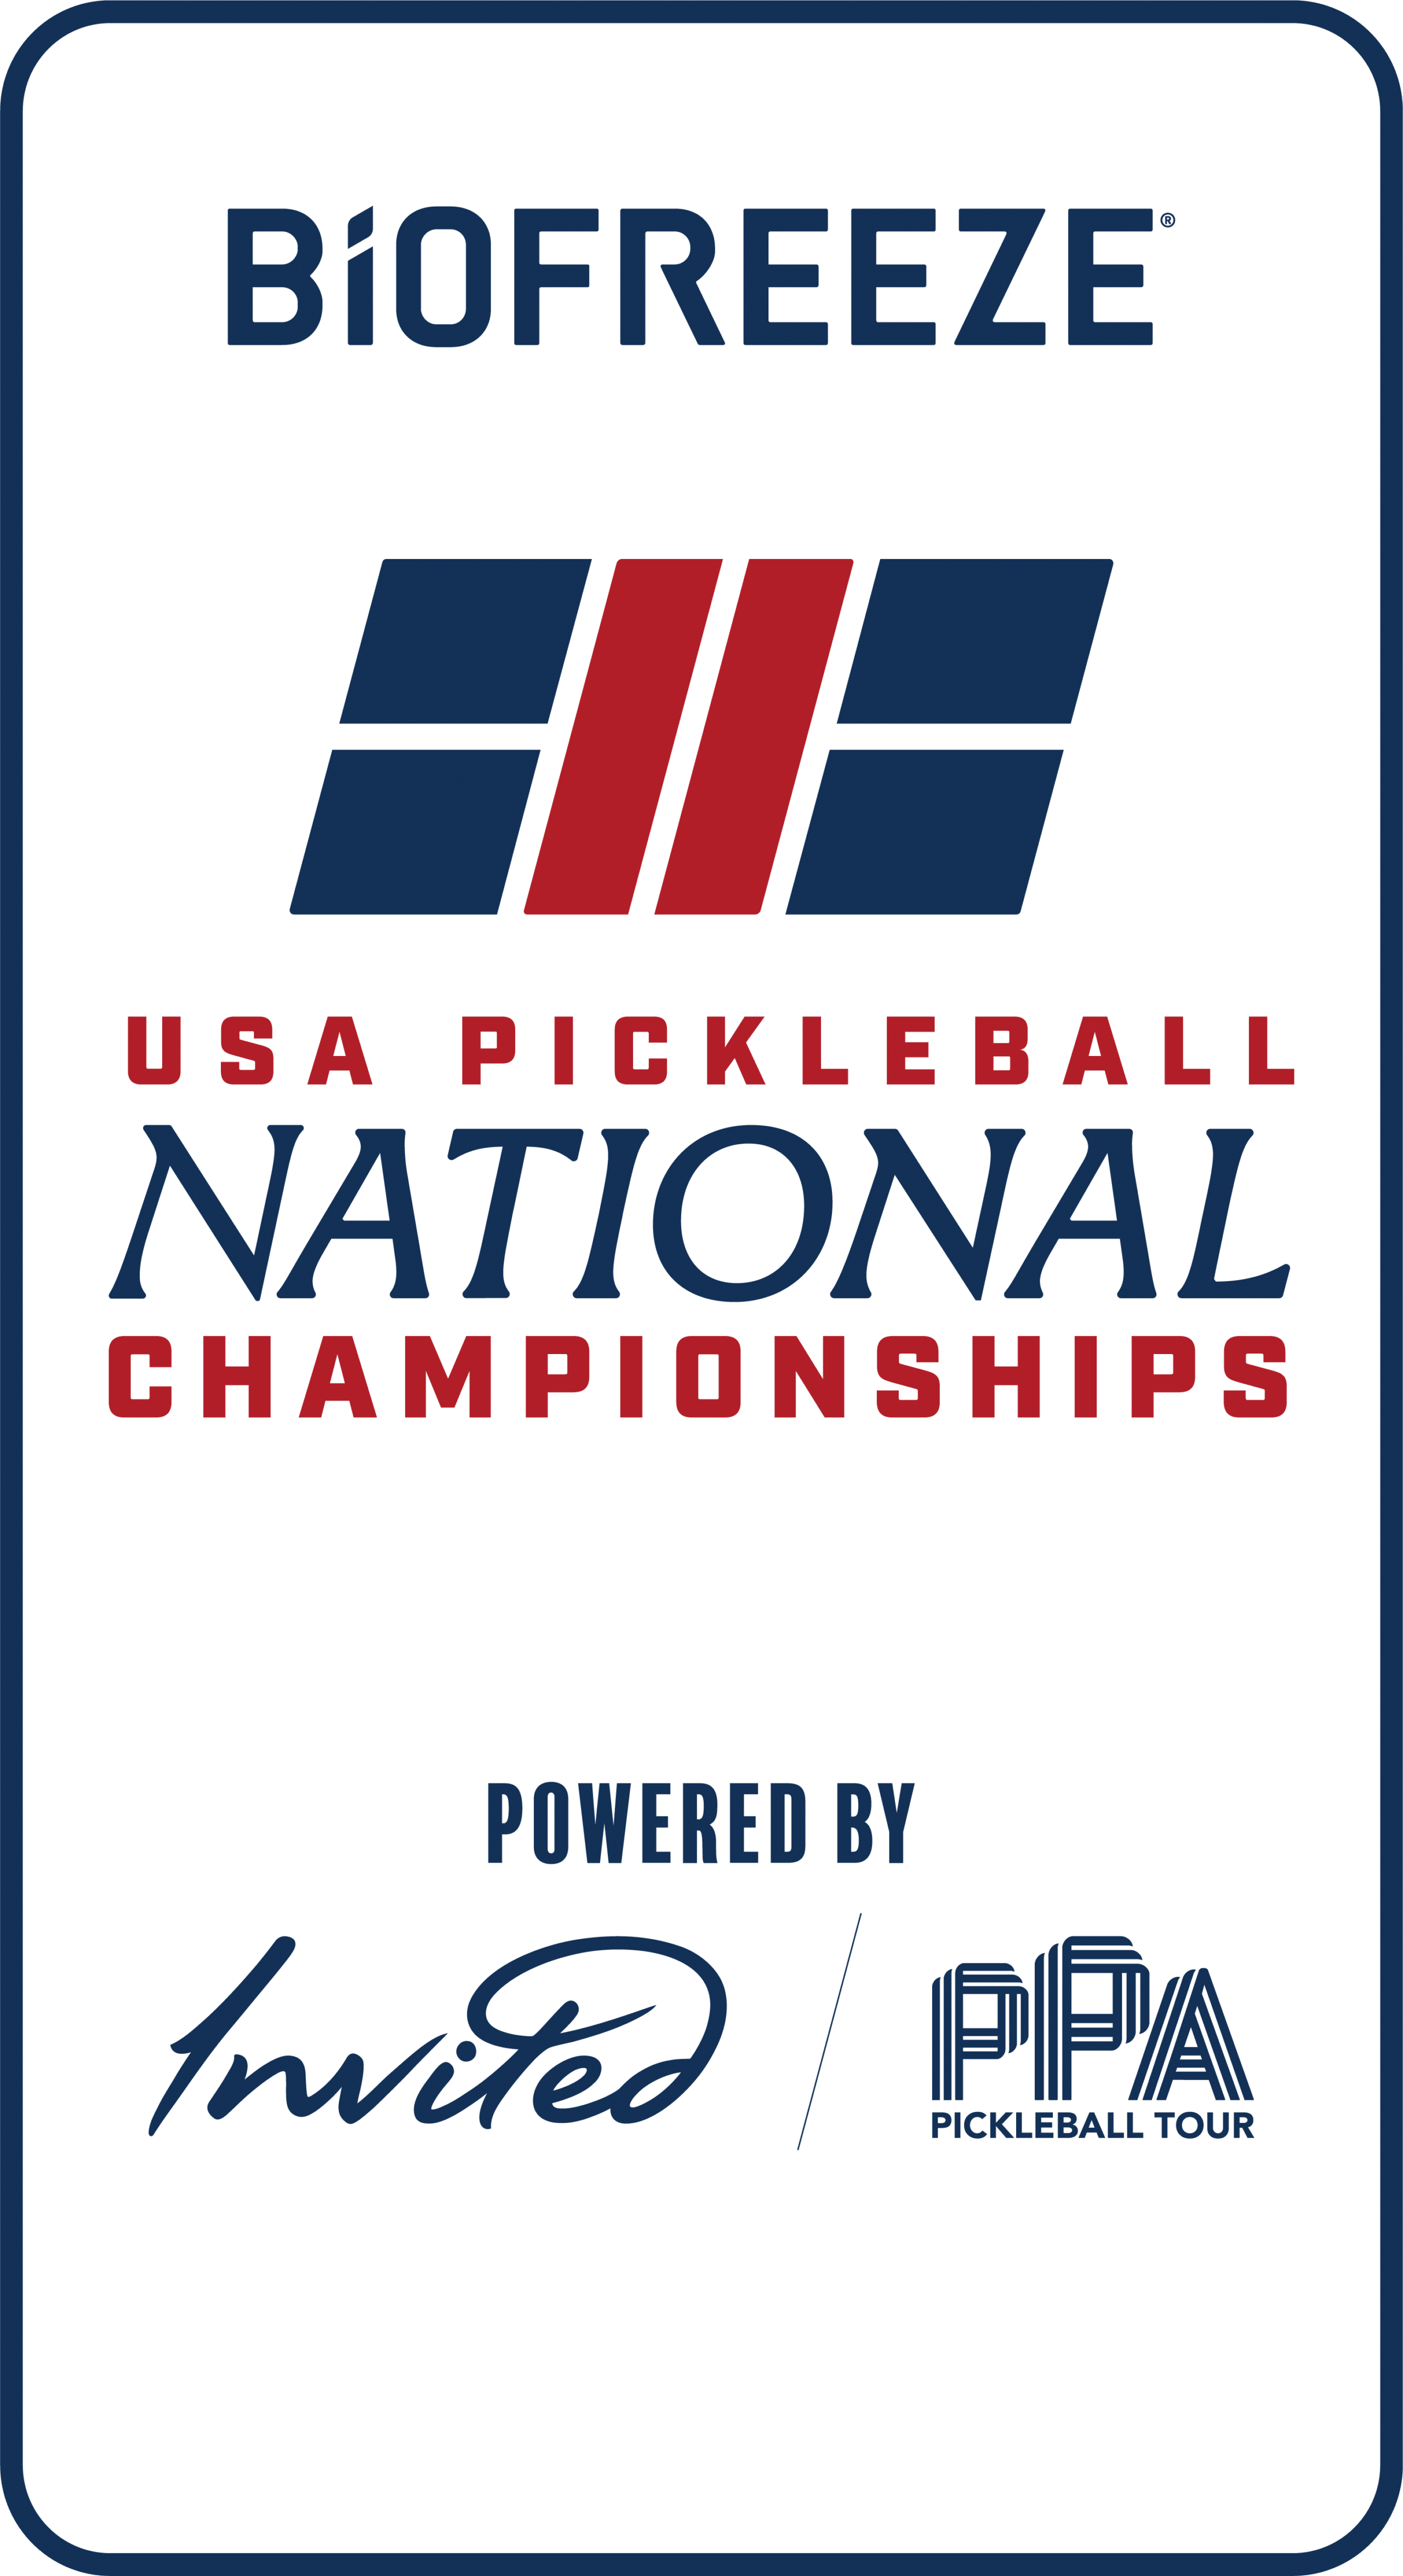 USA Pickleball National Championships Powered by Invited and the PPA Tour